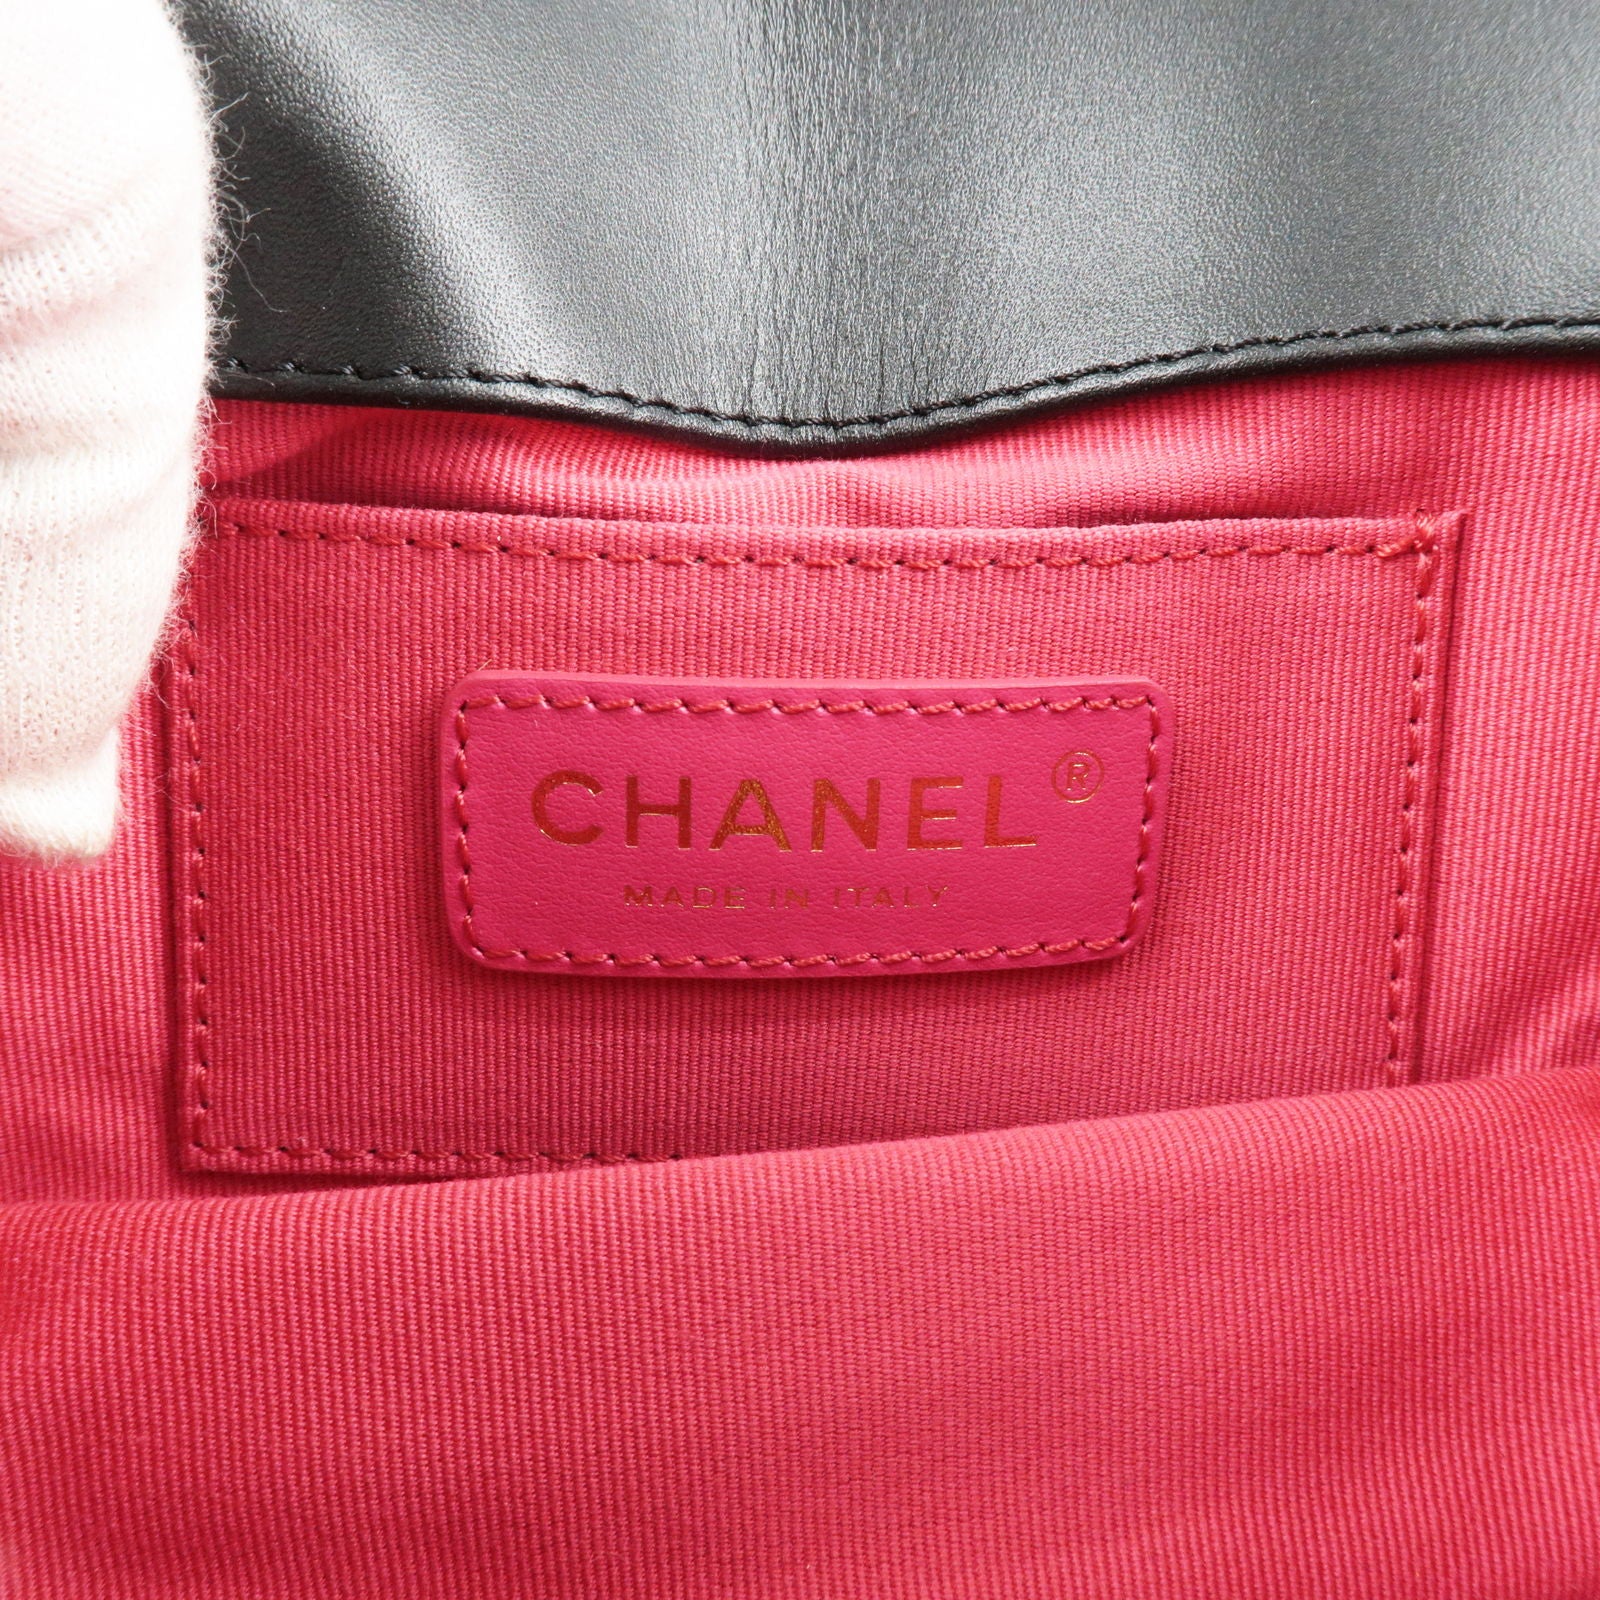 chanel make up pouch bags